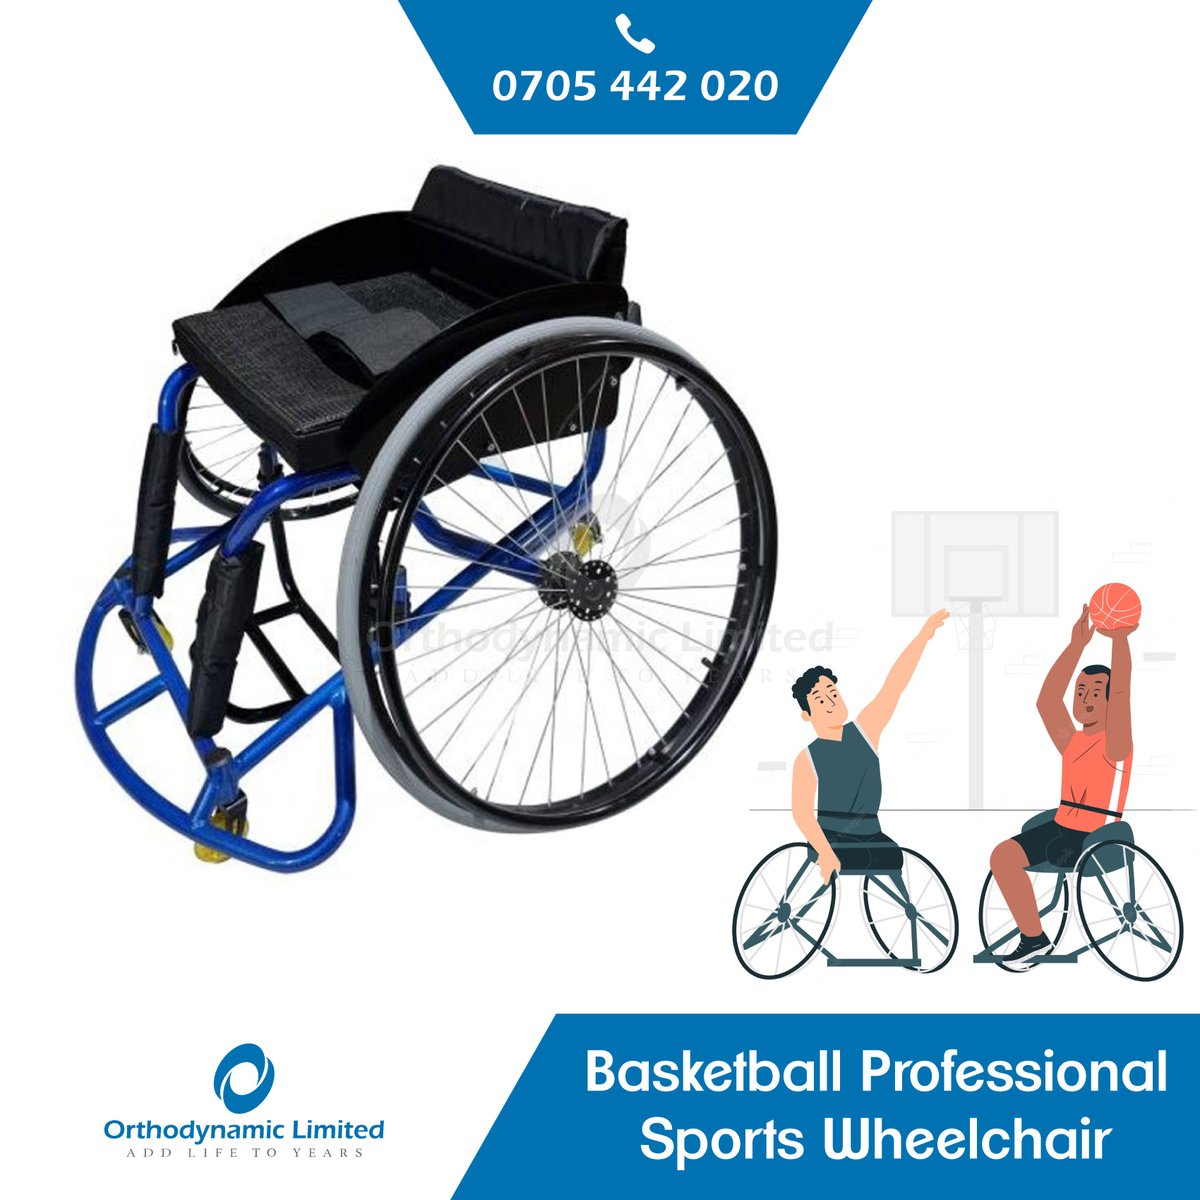 Experience ultimate mobility and performance with our Remarkable Basketball Professional Sports Wheelchair! 🏀♿️

Call/Whastsapp: +254705442020

#SportsWheelchair #MobilityAid #Wheelchair #SpecialOlympics #Basketball JKIA KPLC #TalantaHelaTrophy U19 Football Tournament